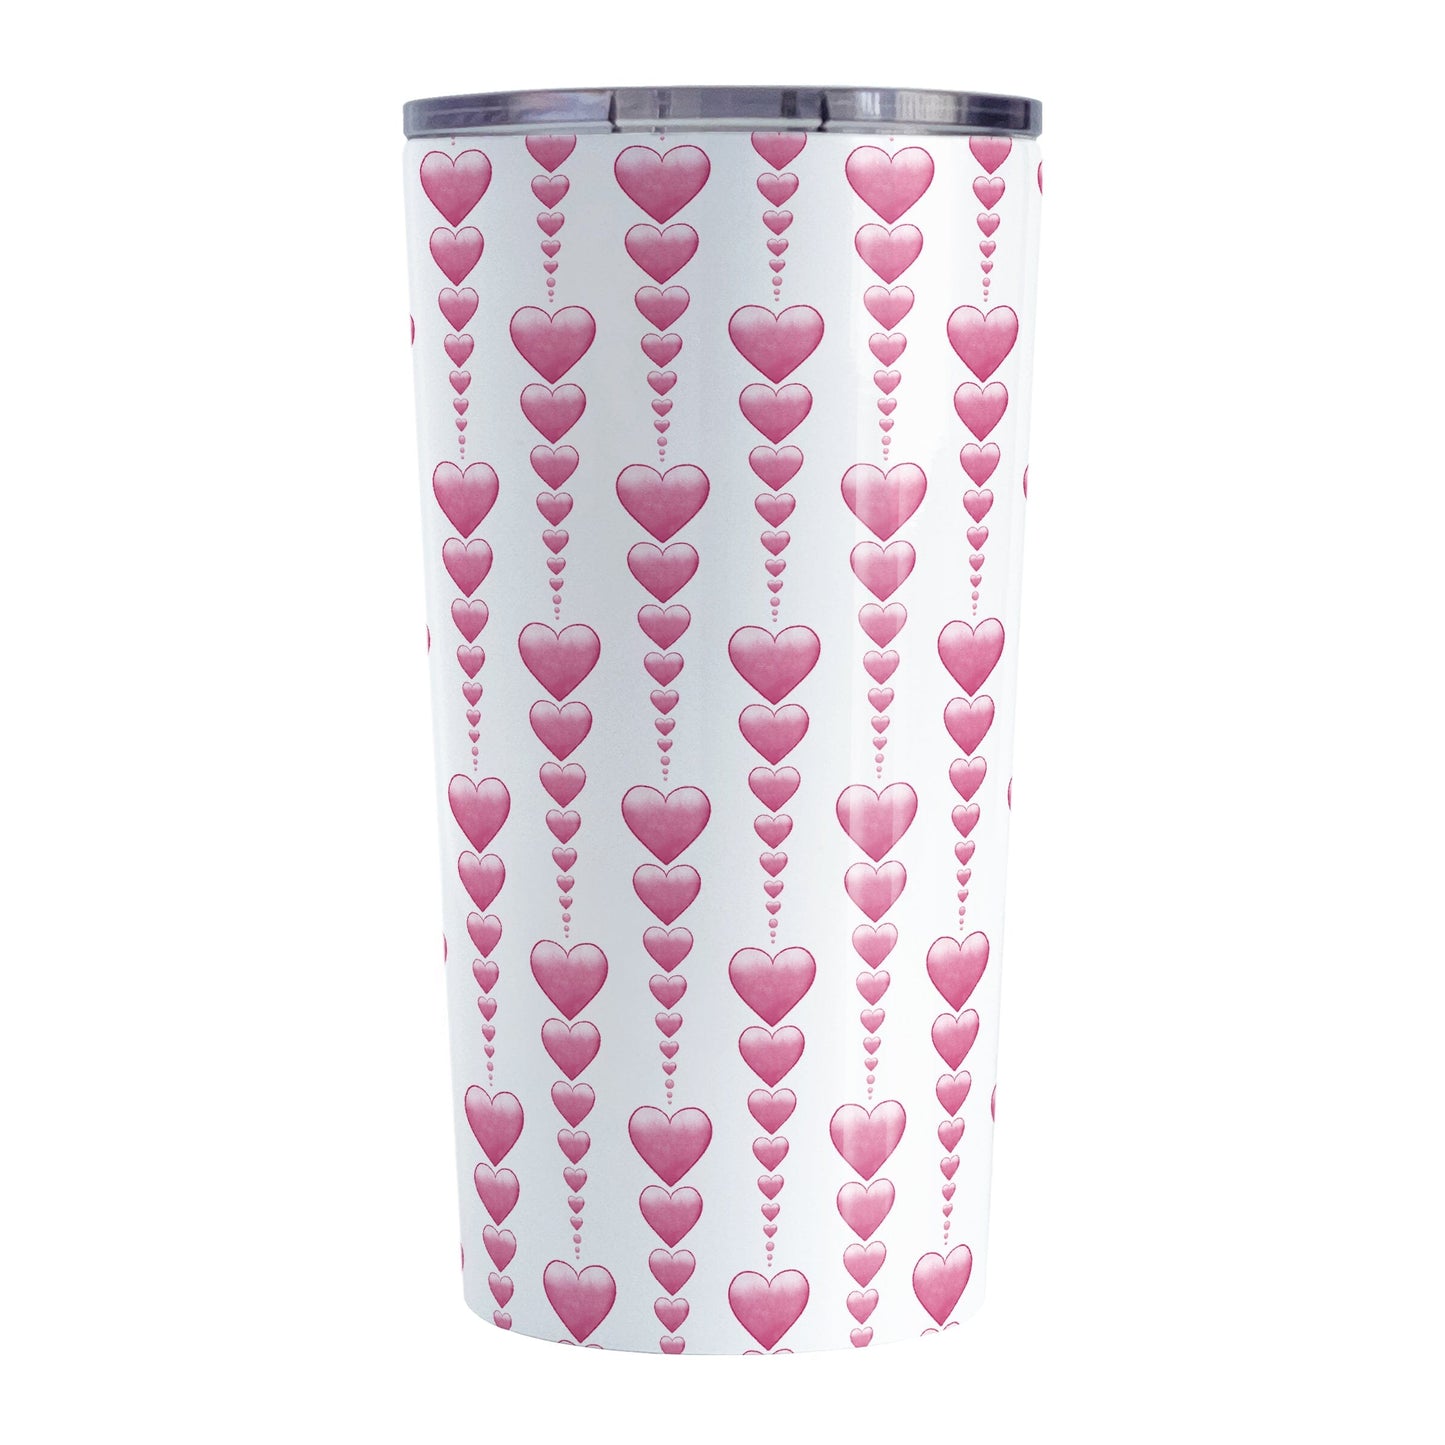 Heart Strings Tumbler Cup (20oz) at Amy's Coffee Mugs. A stainless steel insulated tumbler cup designed with strings of pink hearts descending in size in a pattern that wraps around the cup.